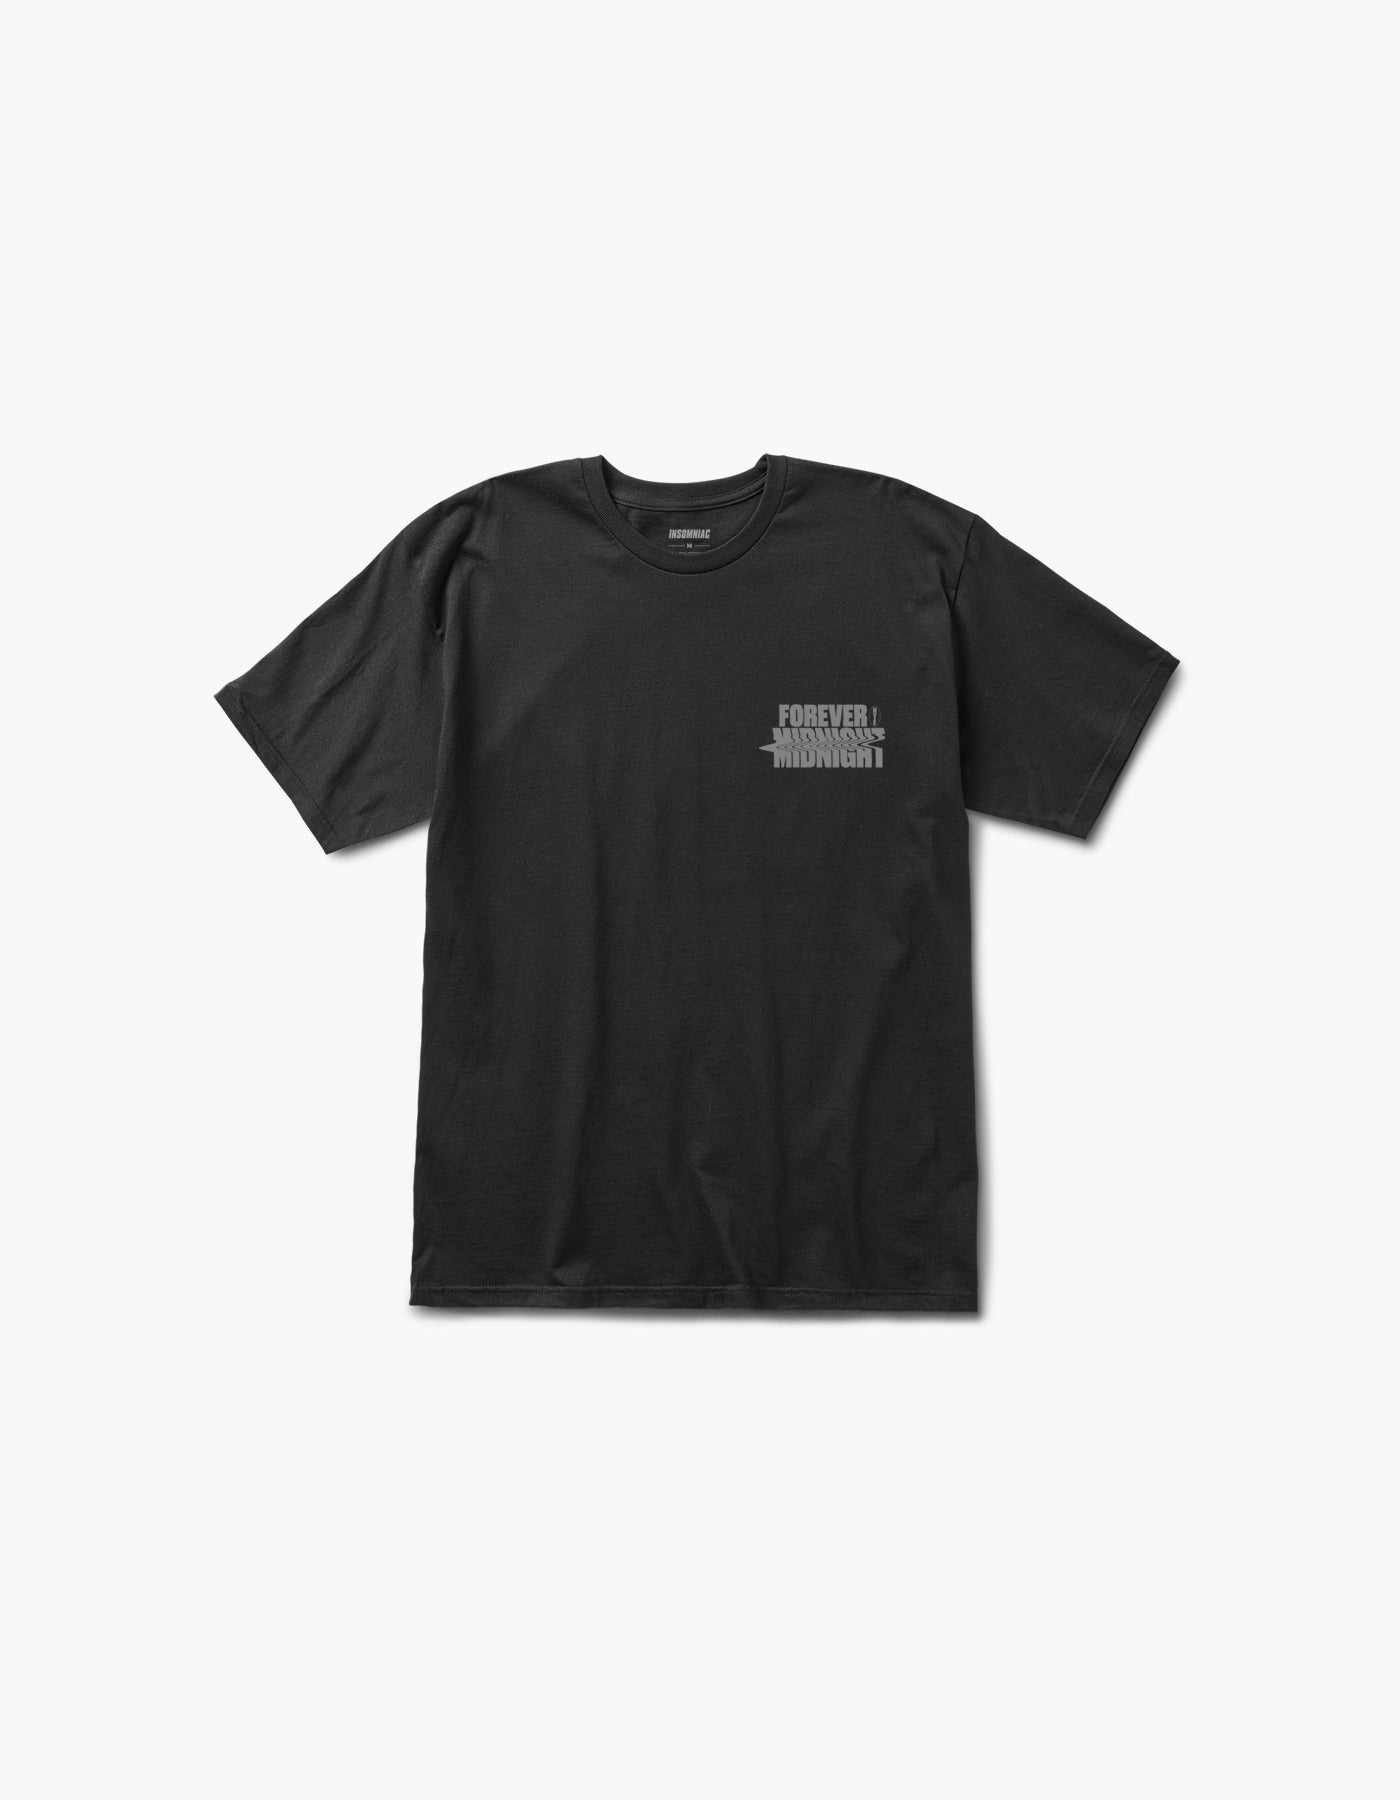 Forever Midnight Las Vegas Lineup S/S Tee